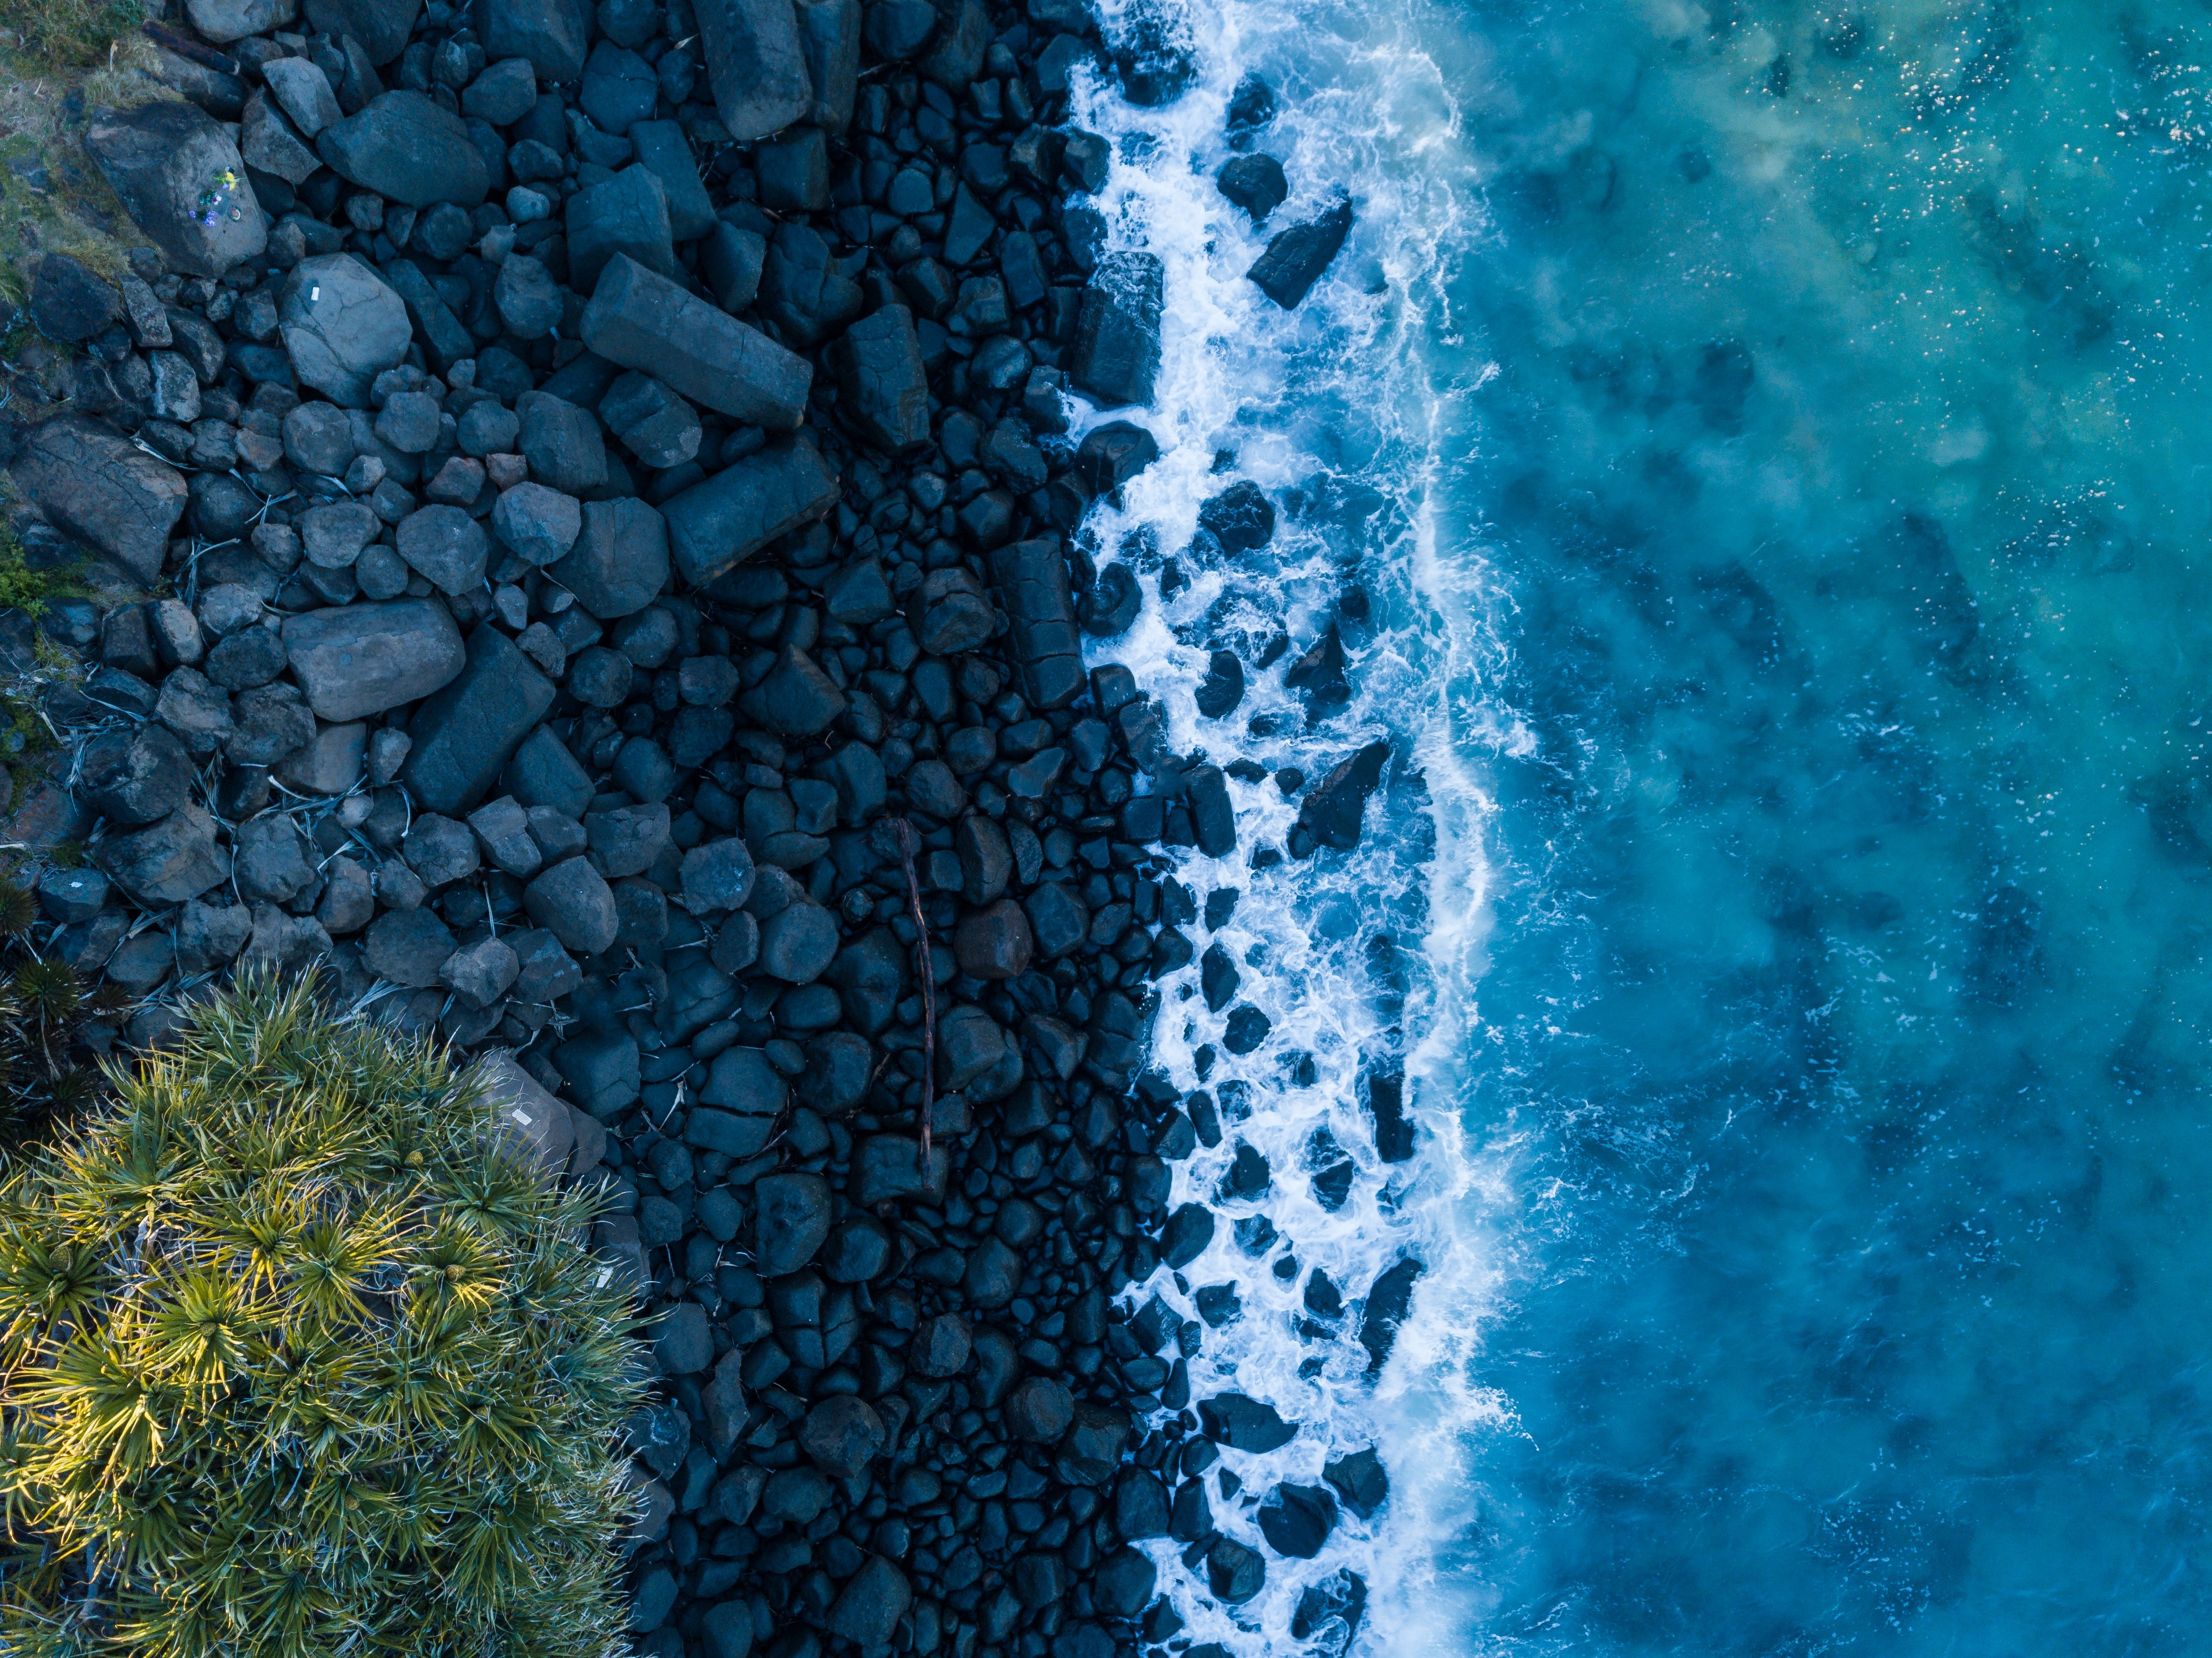 view from above, shore, ocean, bank, stones, surf, nature